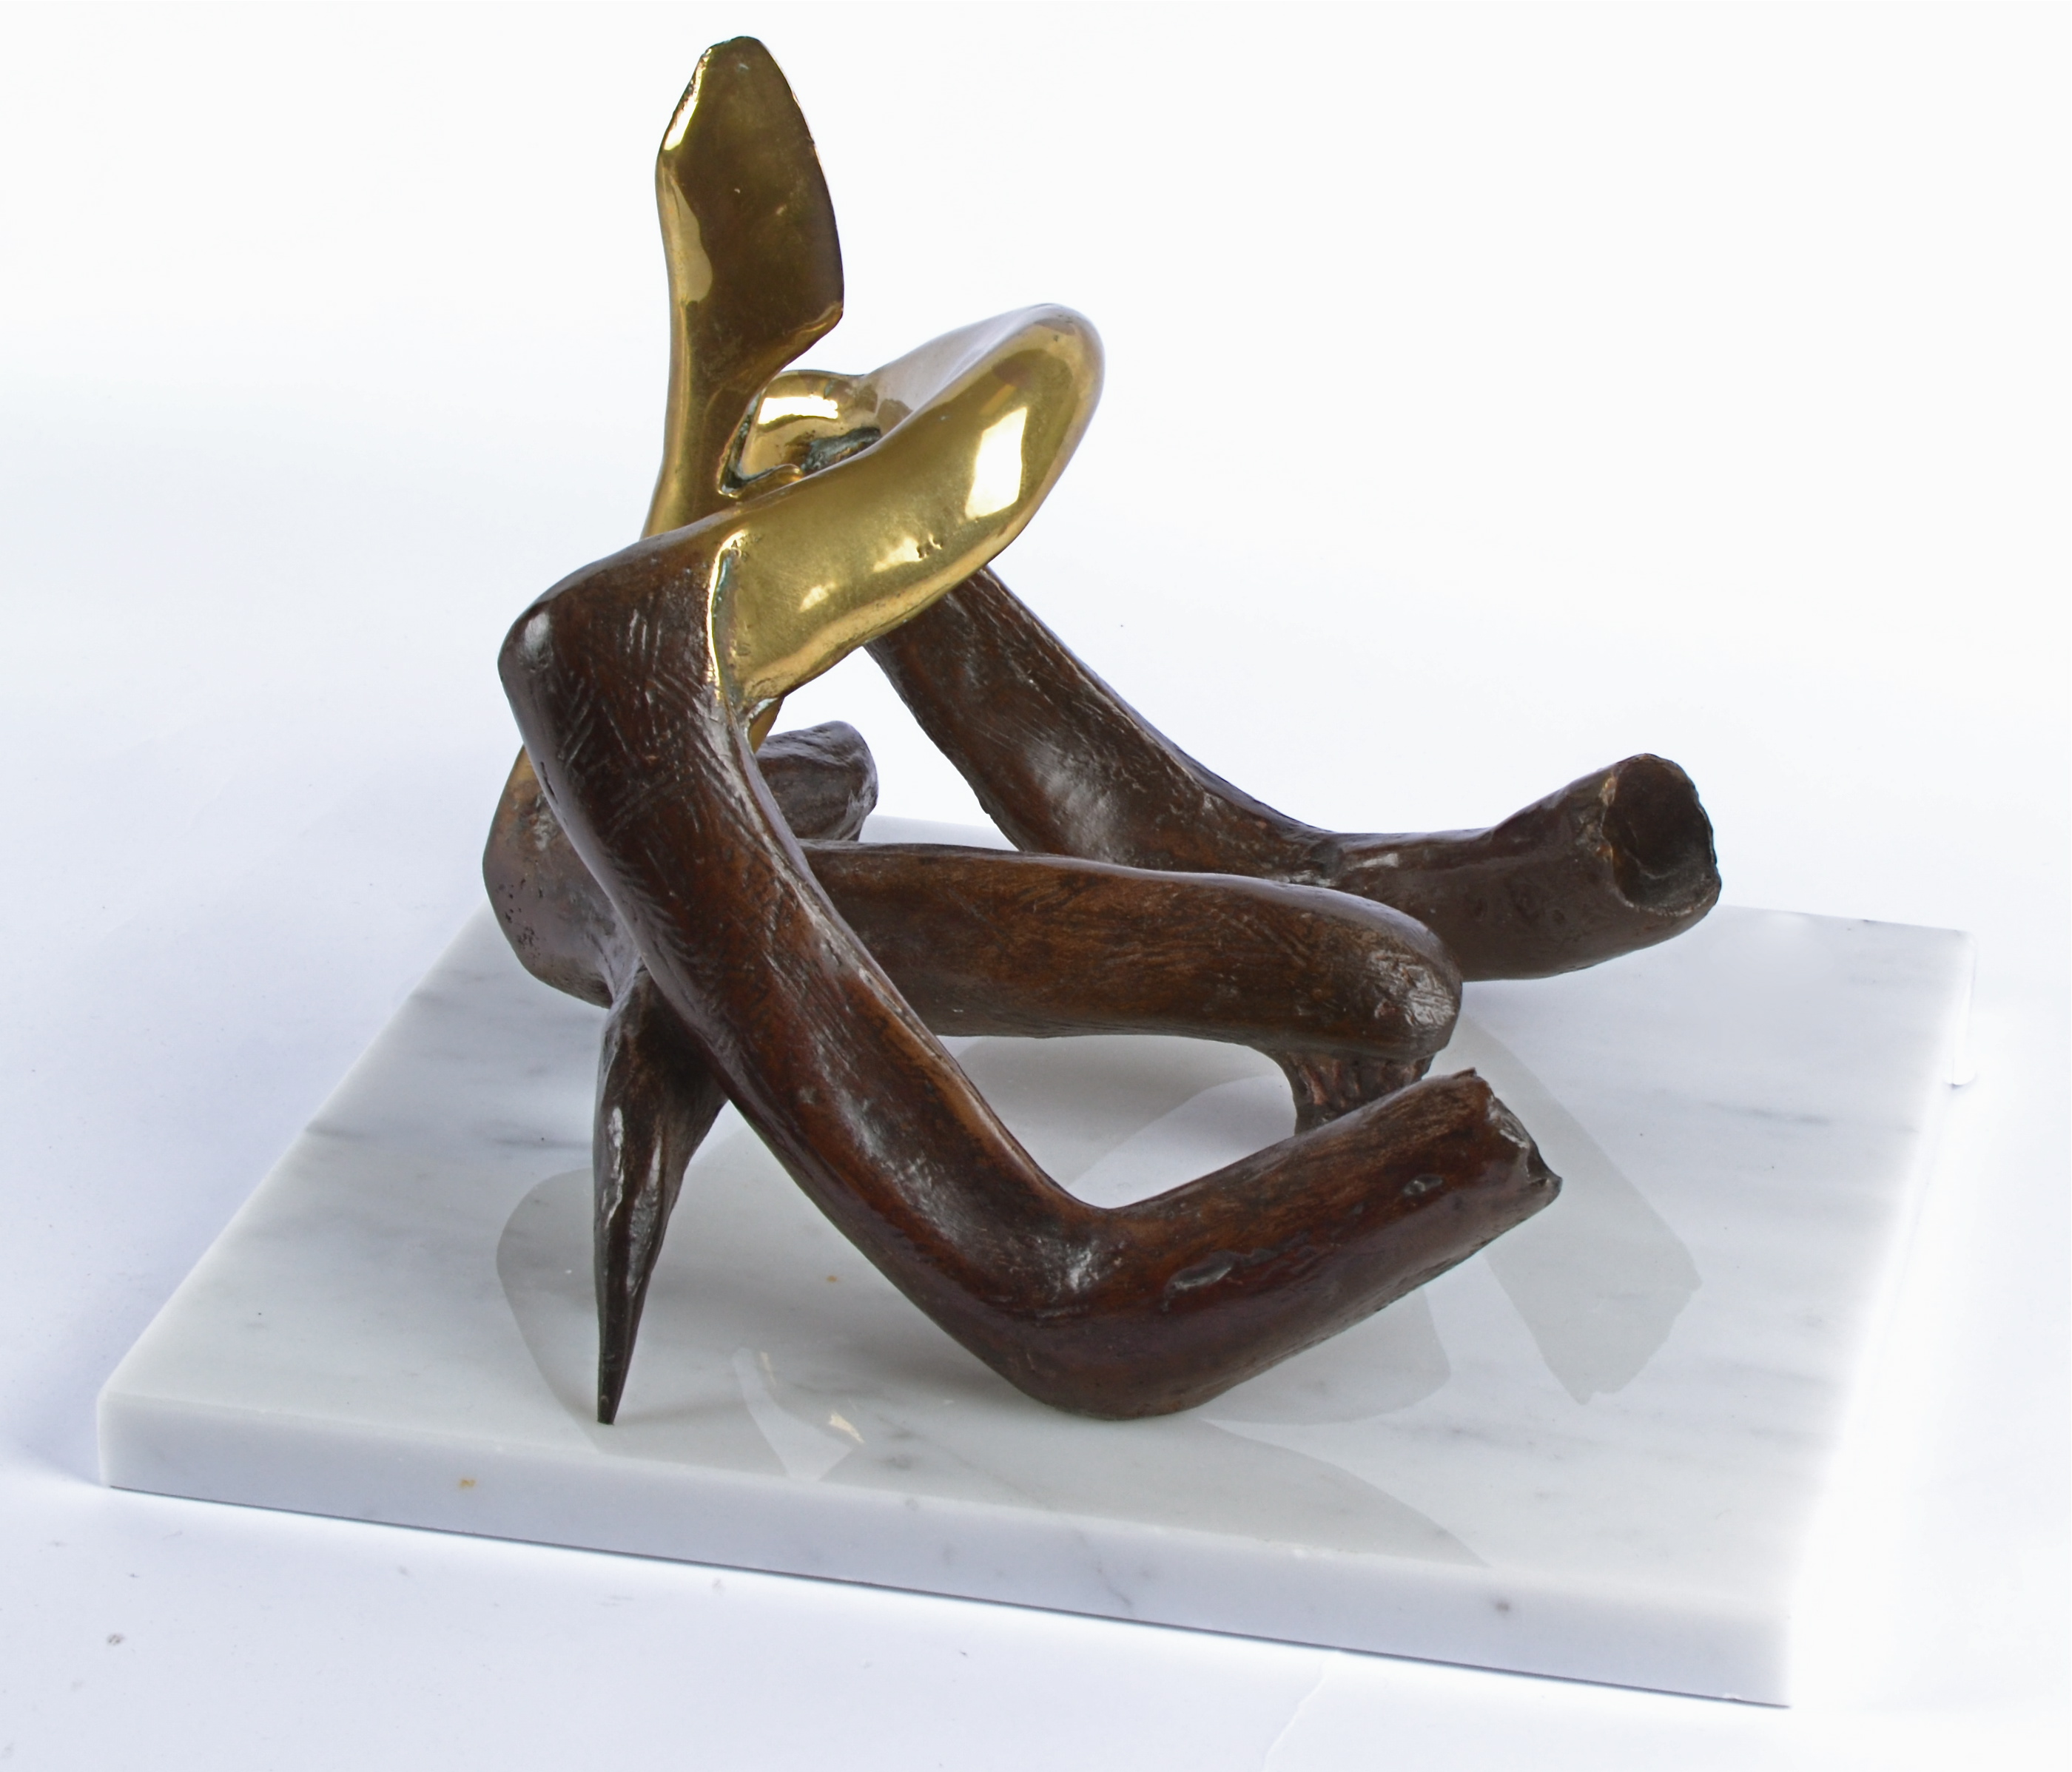 Eli Ilan (1928-1982) 'Confrontation II' bronze maquette, on a white marble plinth base, 1975, signed - Image 5 of 9